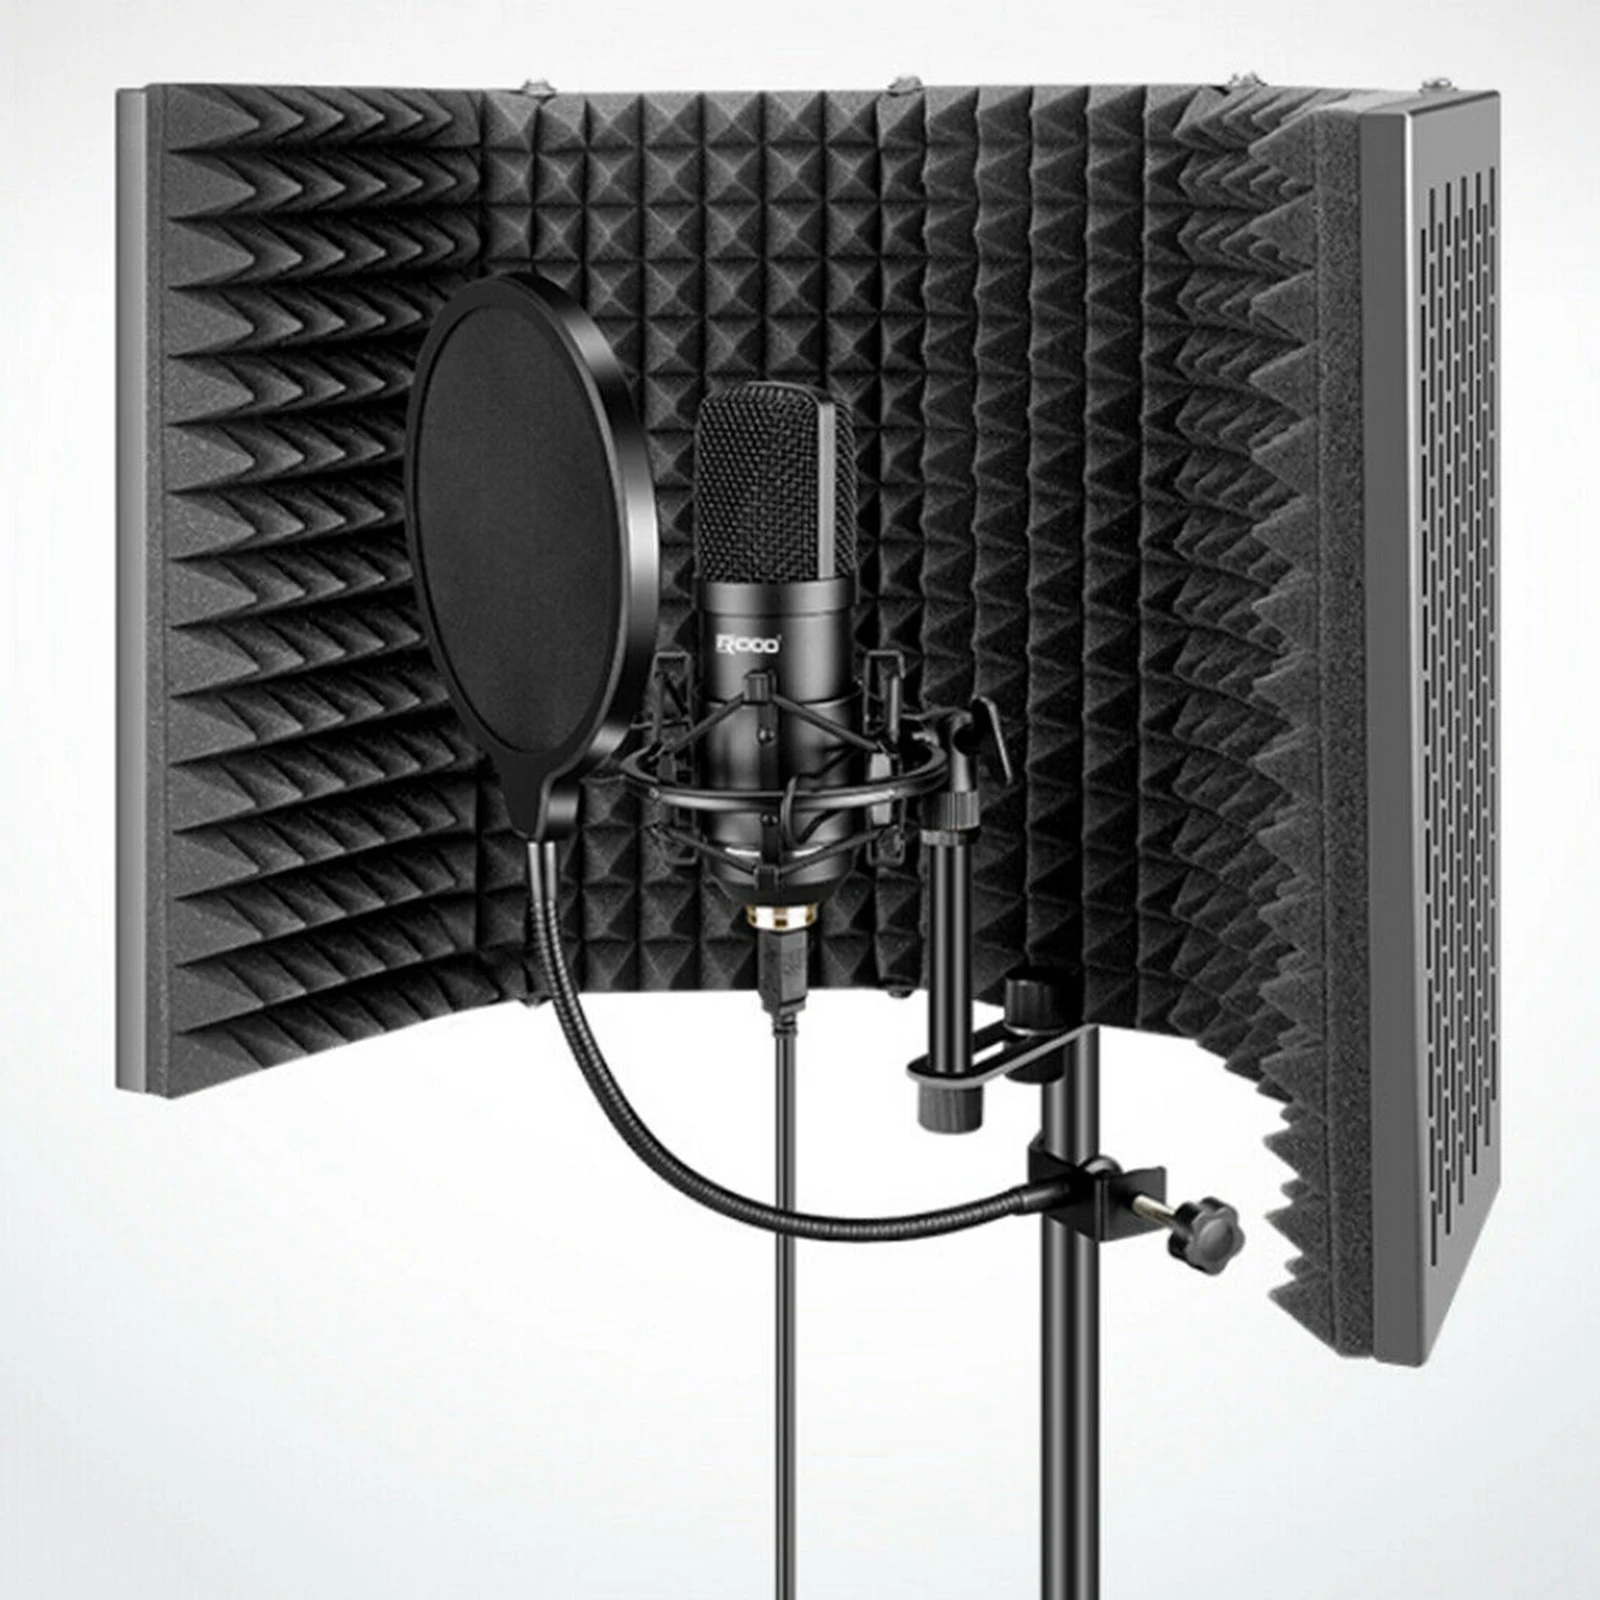 

Adjustable 5 Panel Microphone Isolation Shield Foldable Studio Recording Mic Filter Vocal Booth for Recording Broadcast